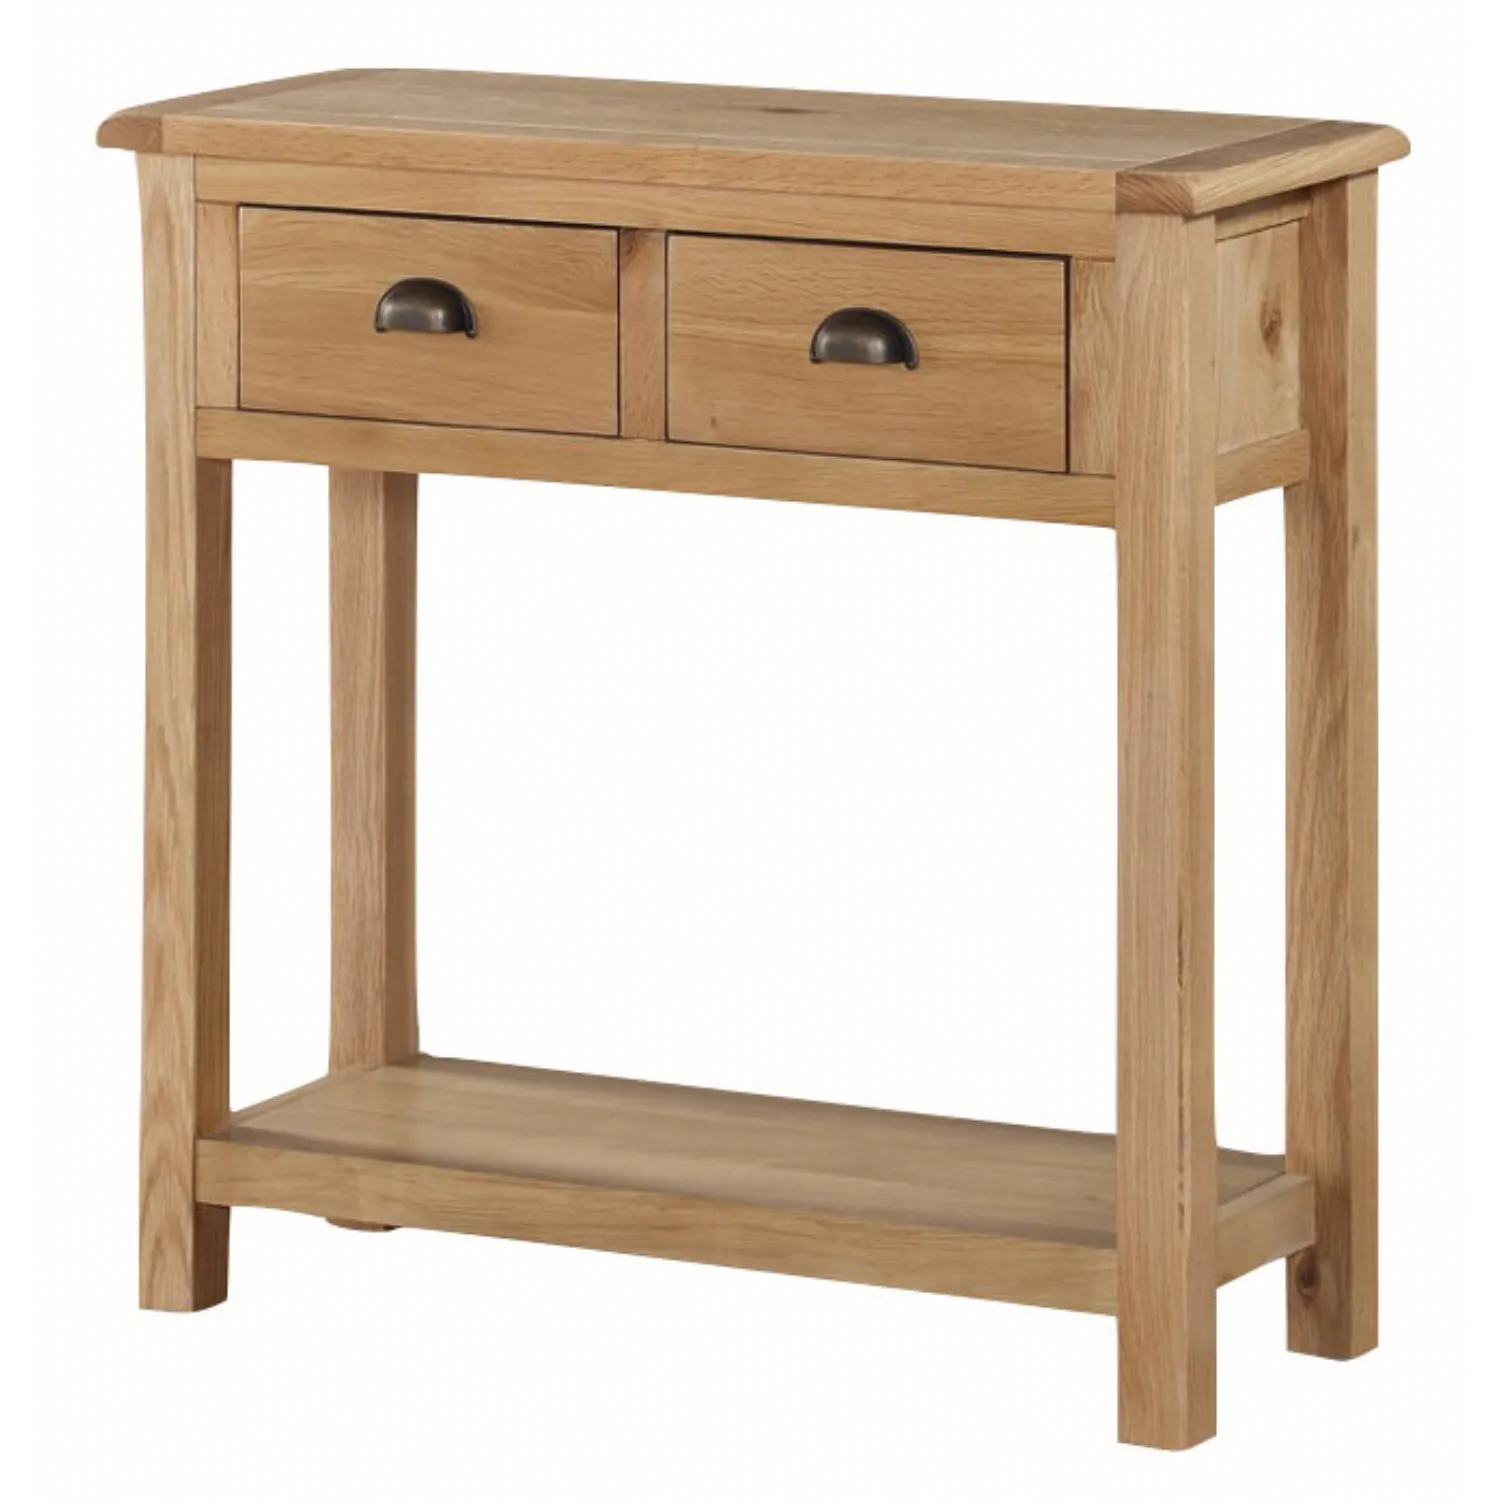 Rustic Solid Oak 2 Drawer Console Table